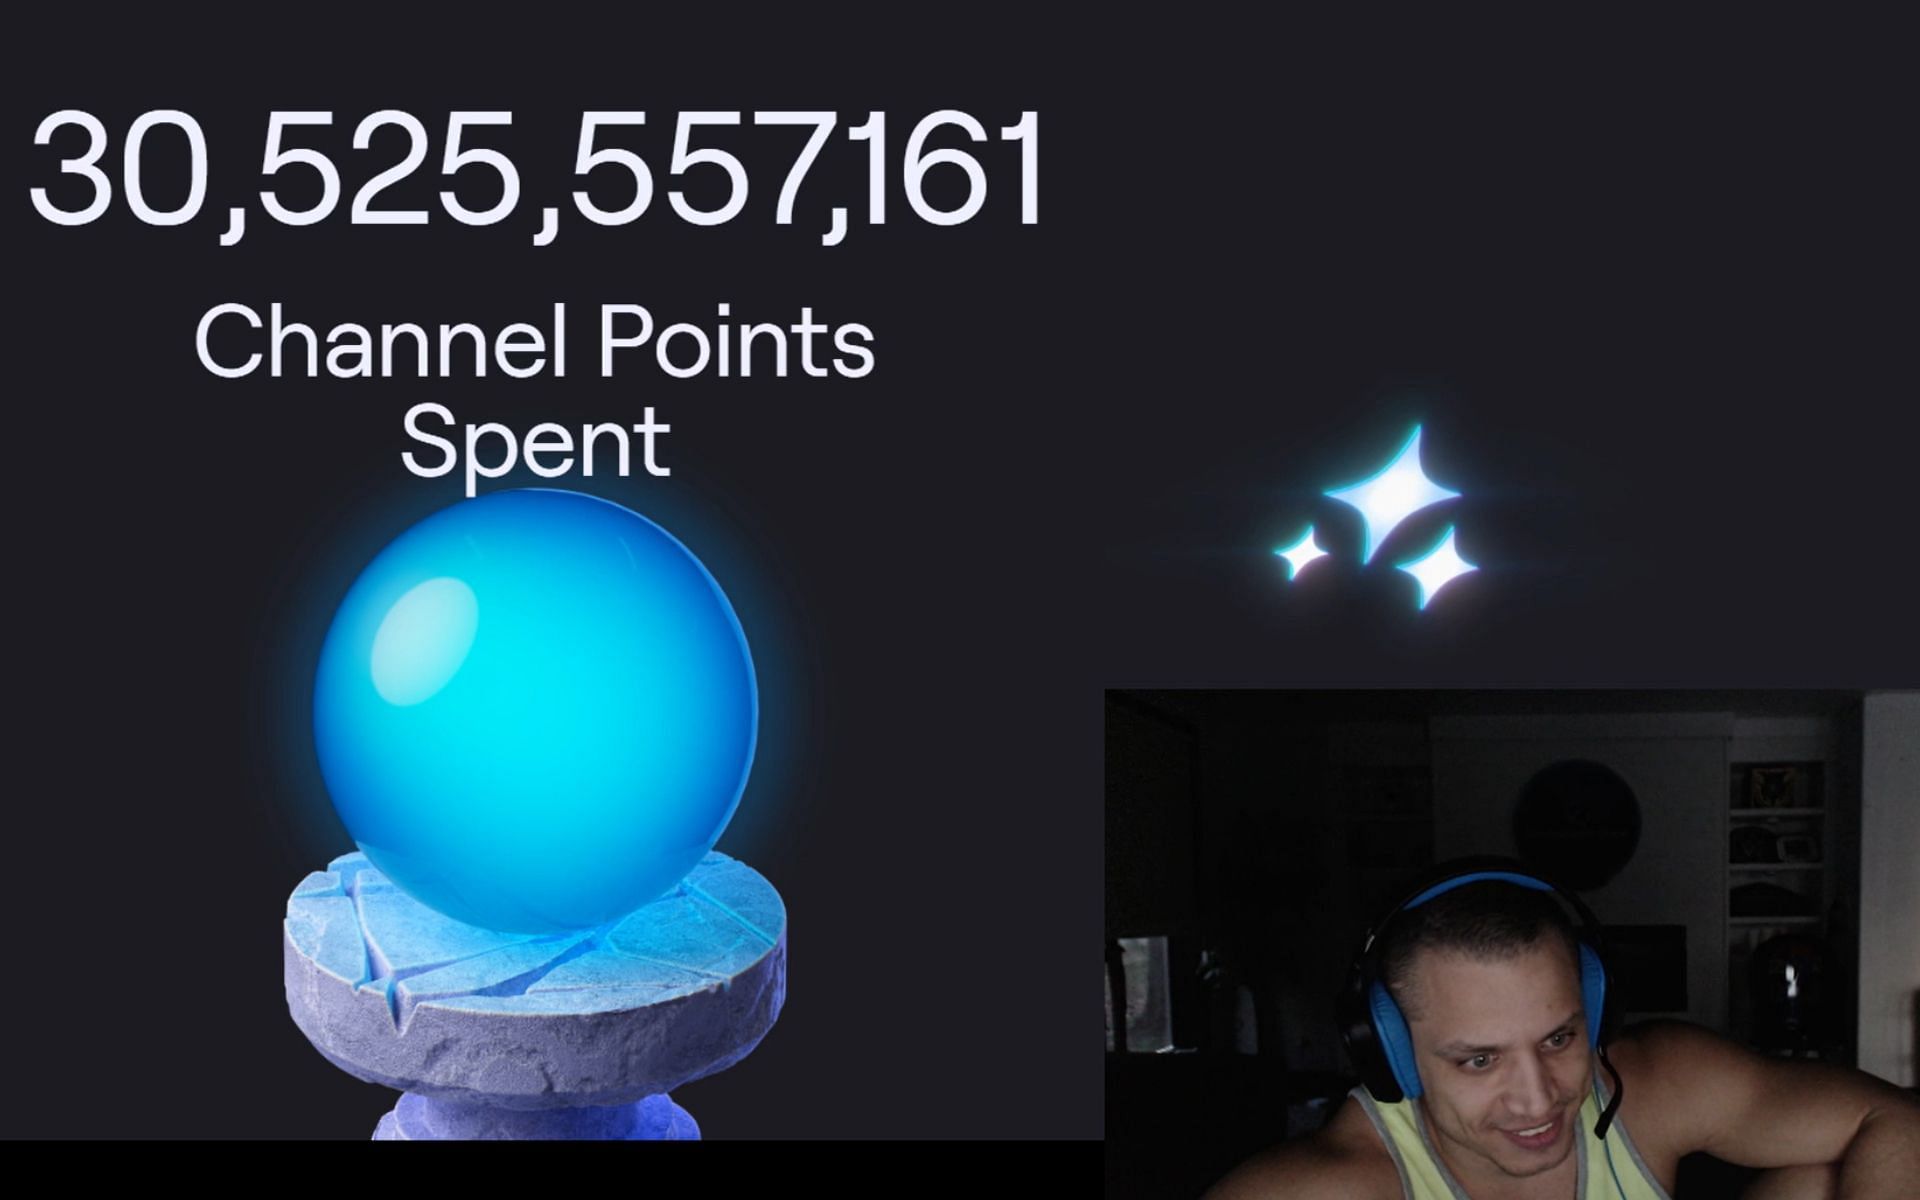 Tyler1 shocked at fans spending over 30 billion points on his channel (Image via Tyler1/Twitch)